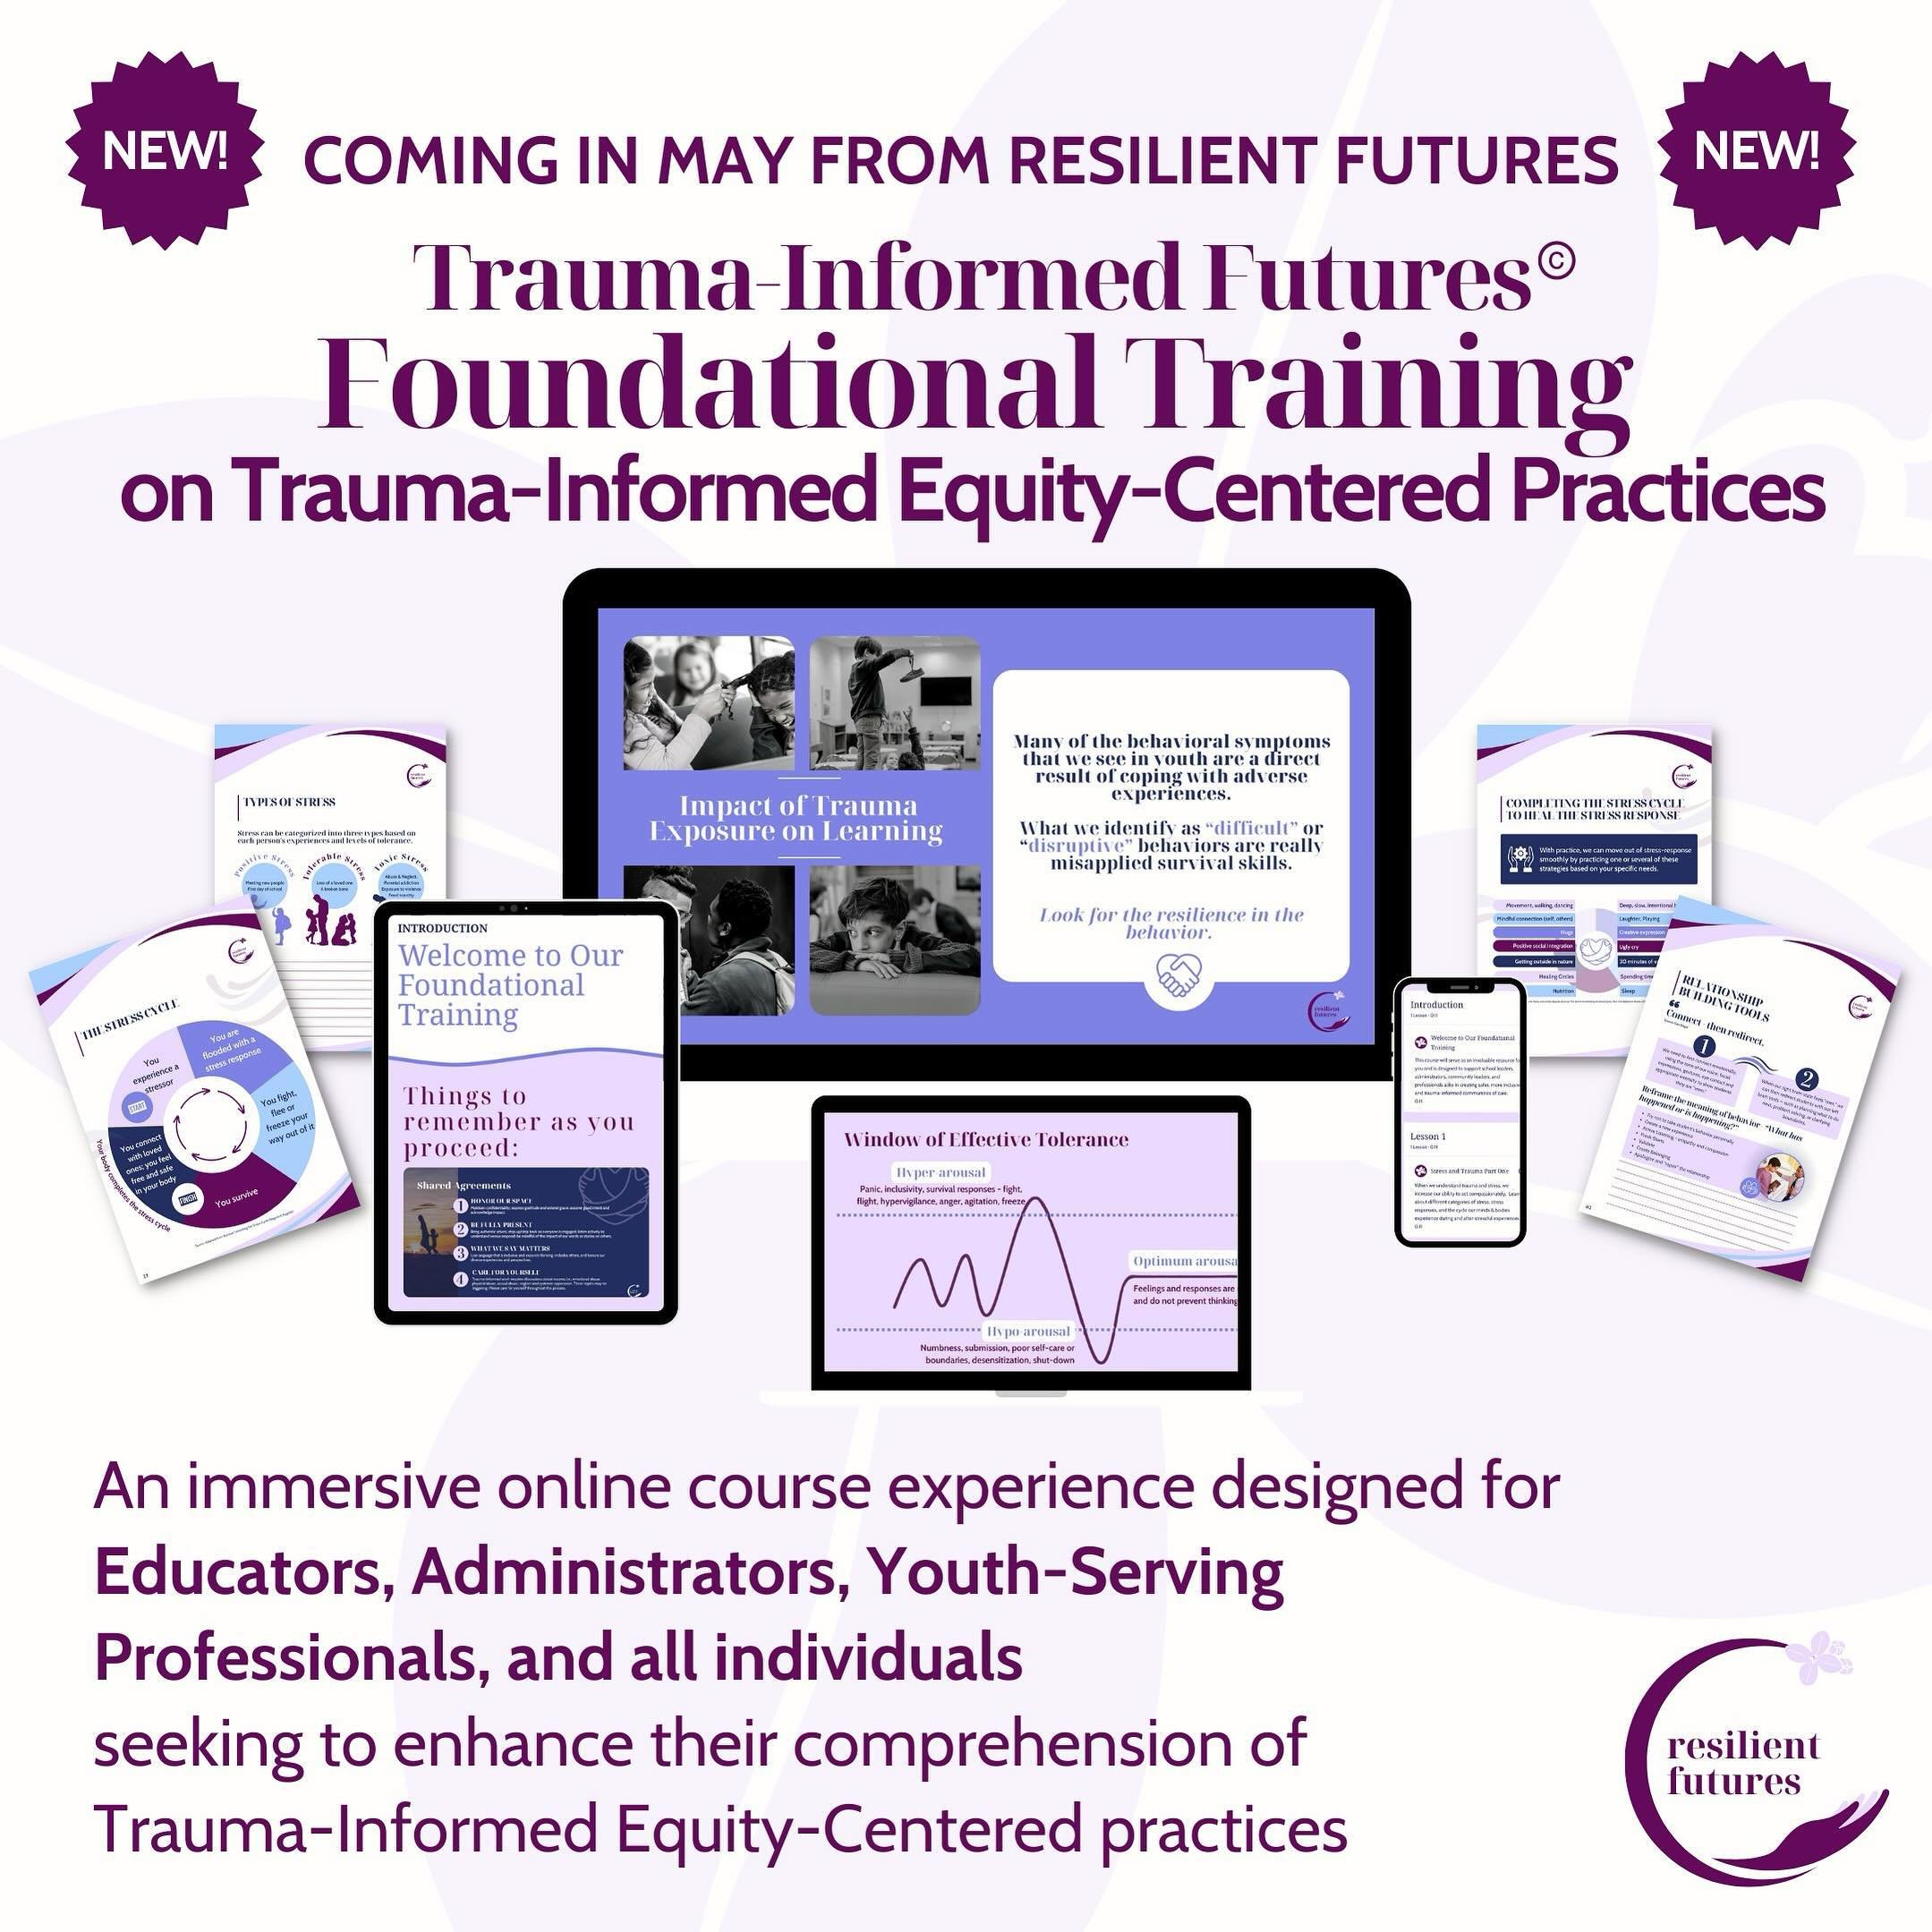 We are thrilled to announce that our Trauma-Informed Futures&copy; Foundational Training on Trauma-Informed Equity-Centered practices will be launching as an Online Course this May! Please share and help us spread the word! 

This course is designed 